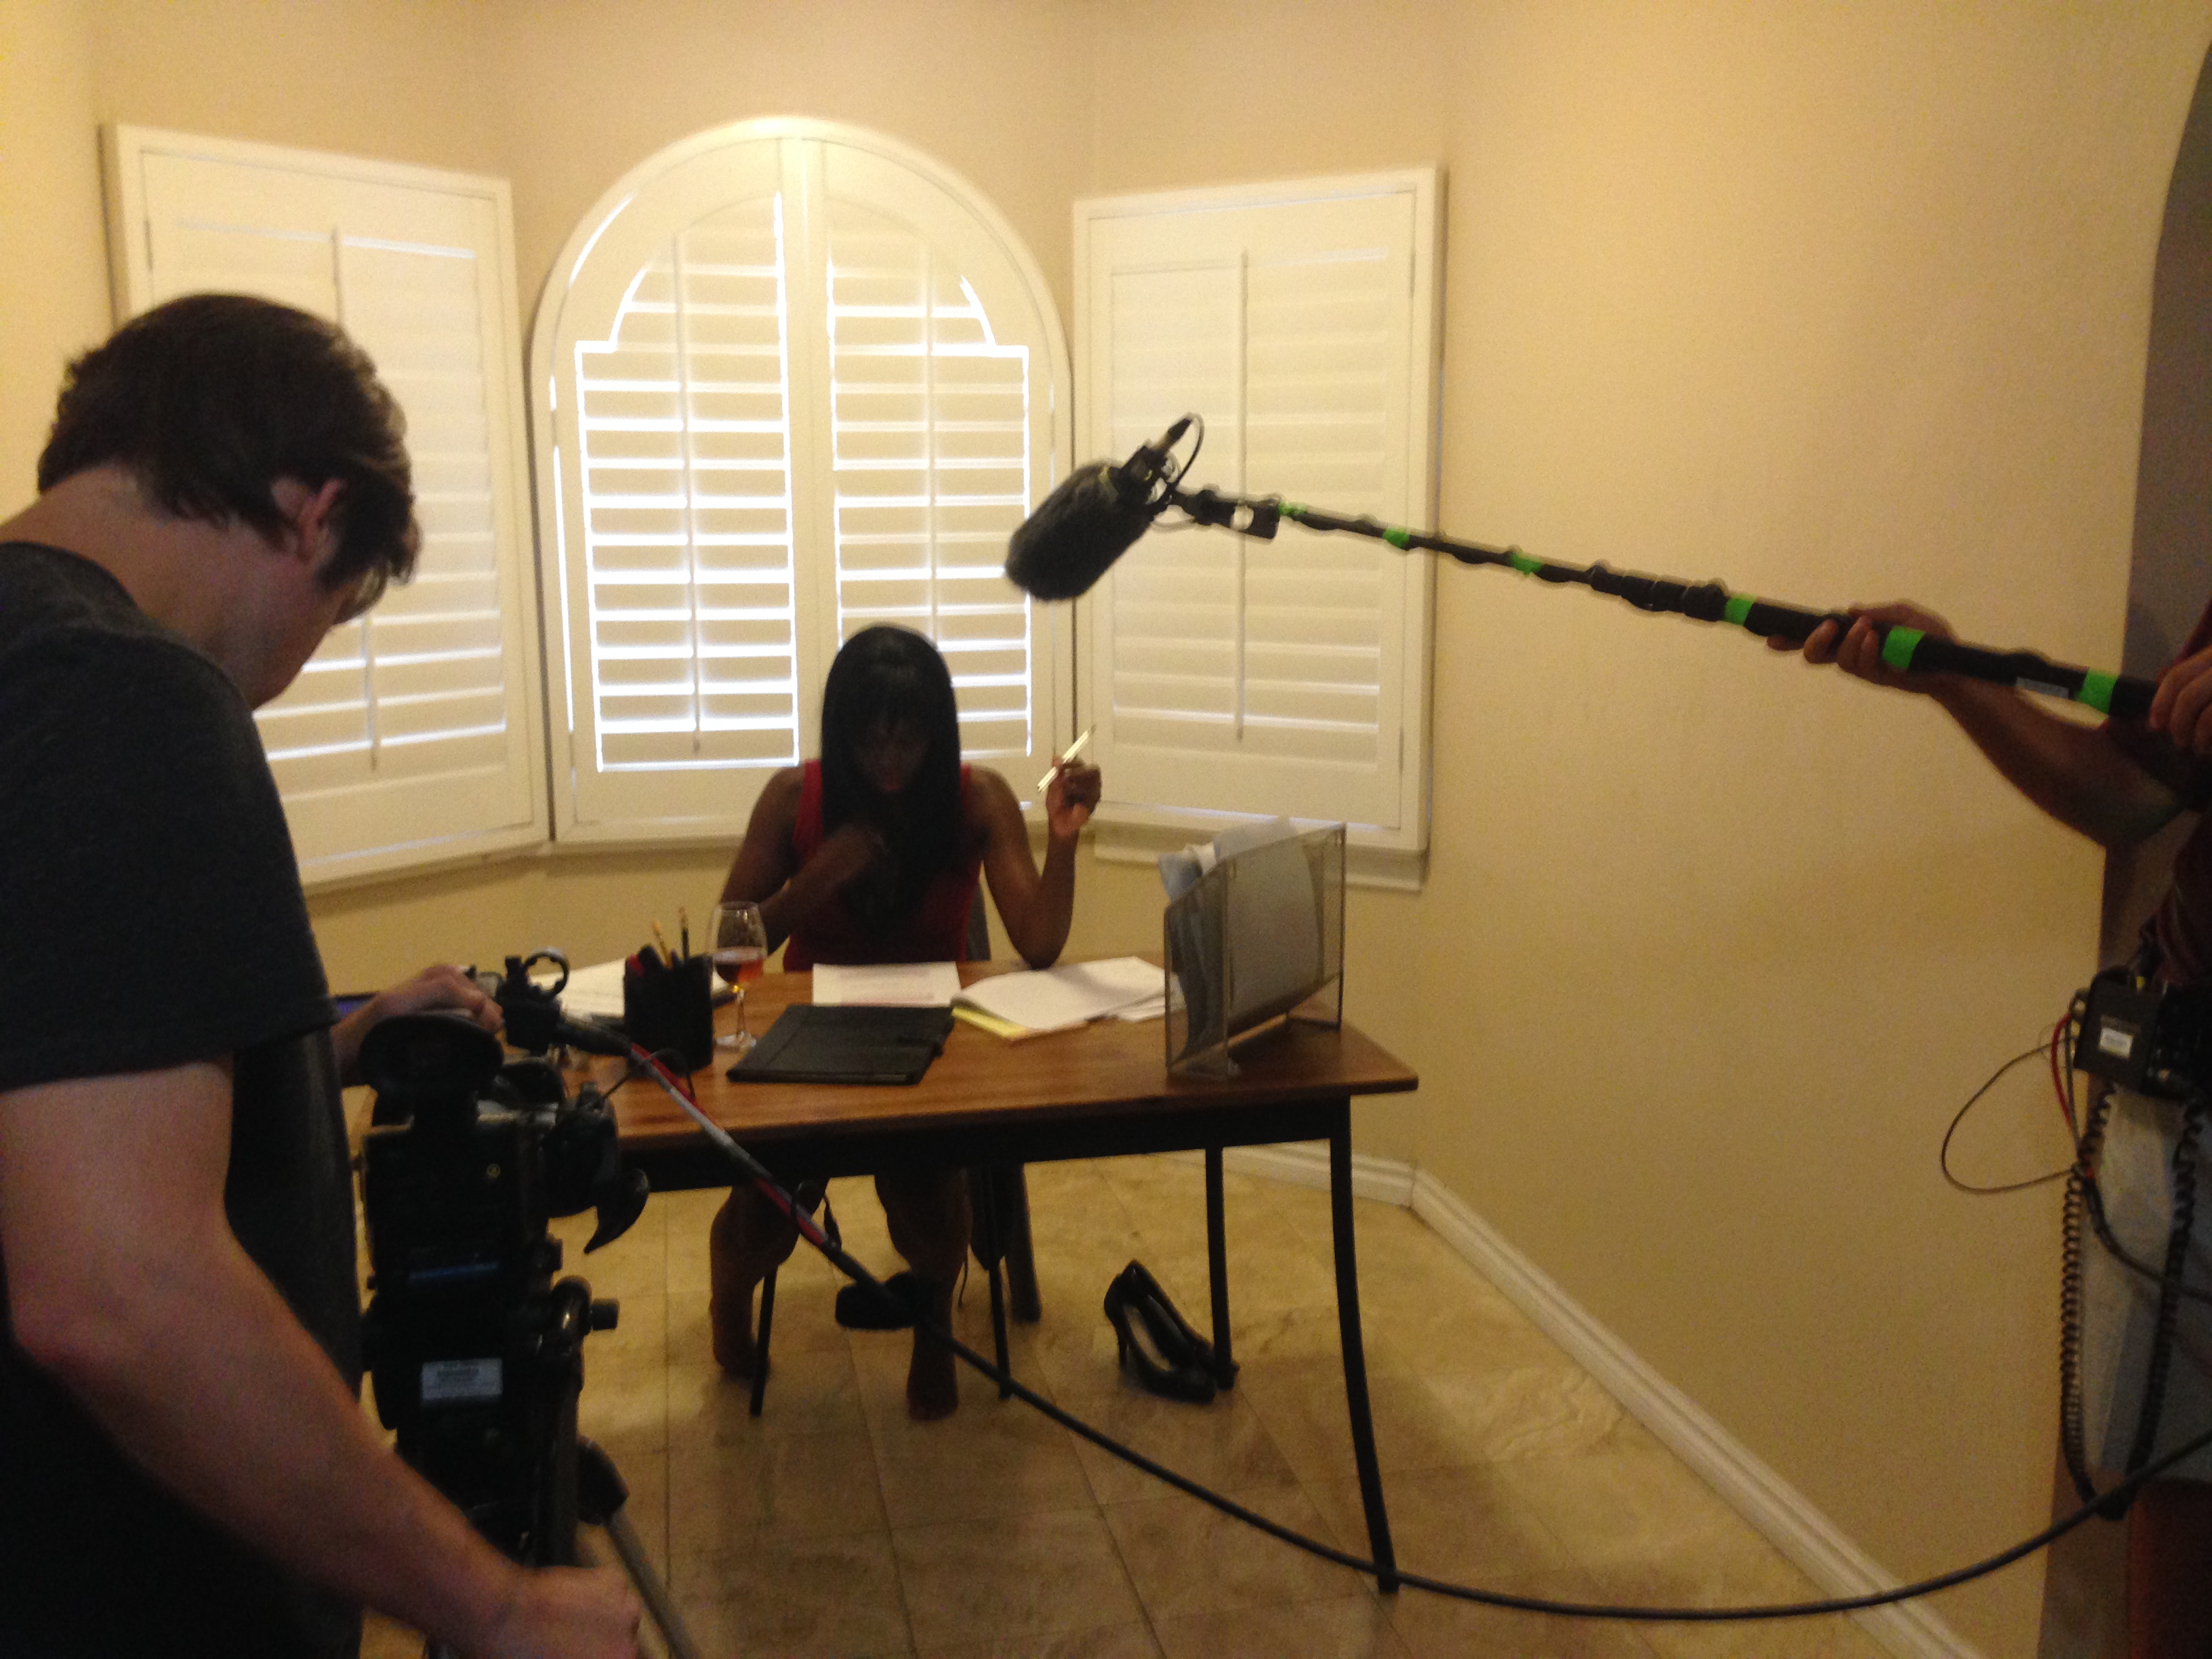 Shon Wilson on the set of Dana's Song, a film written and directed by Aaron Ashby